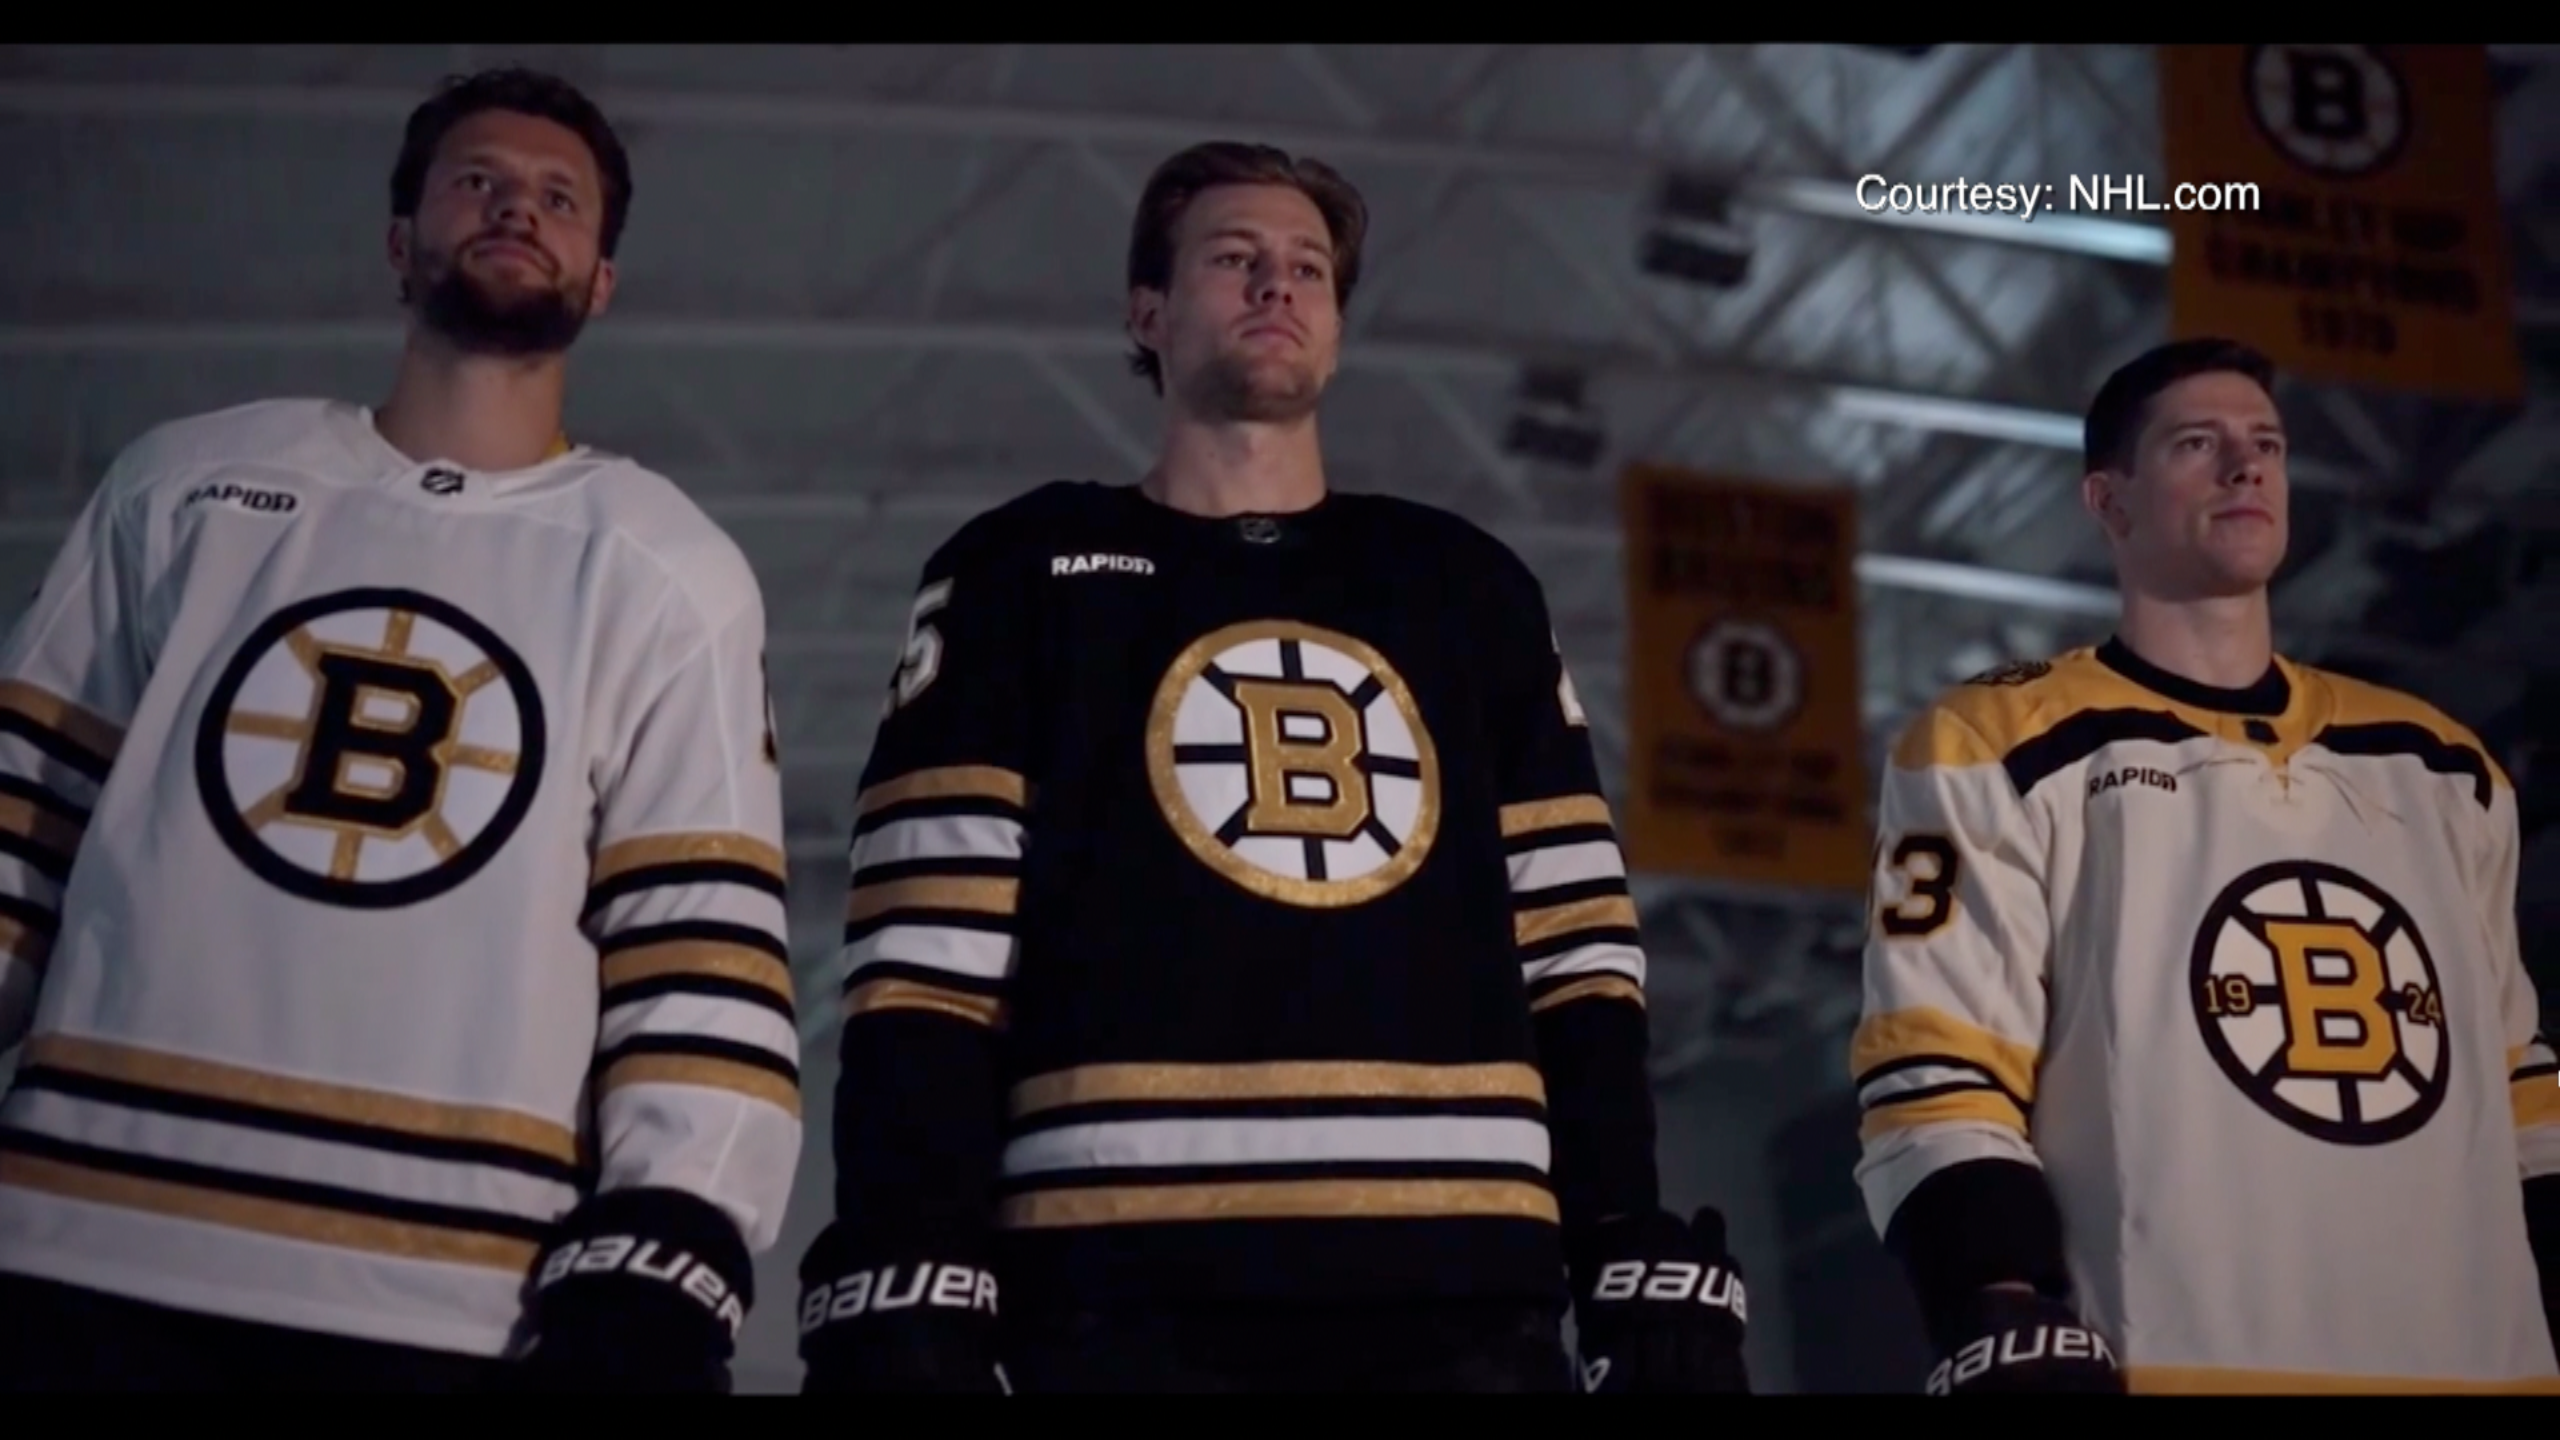 Bruins to unveil this year's Alternate jersey at the annual Boston